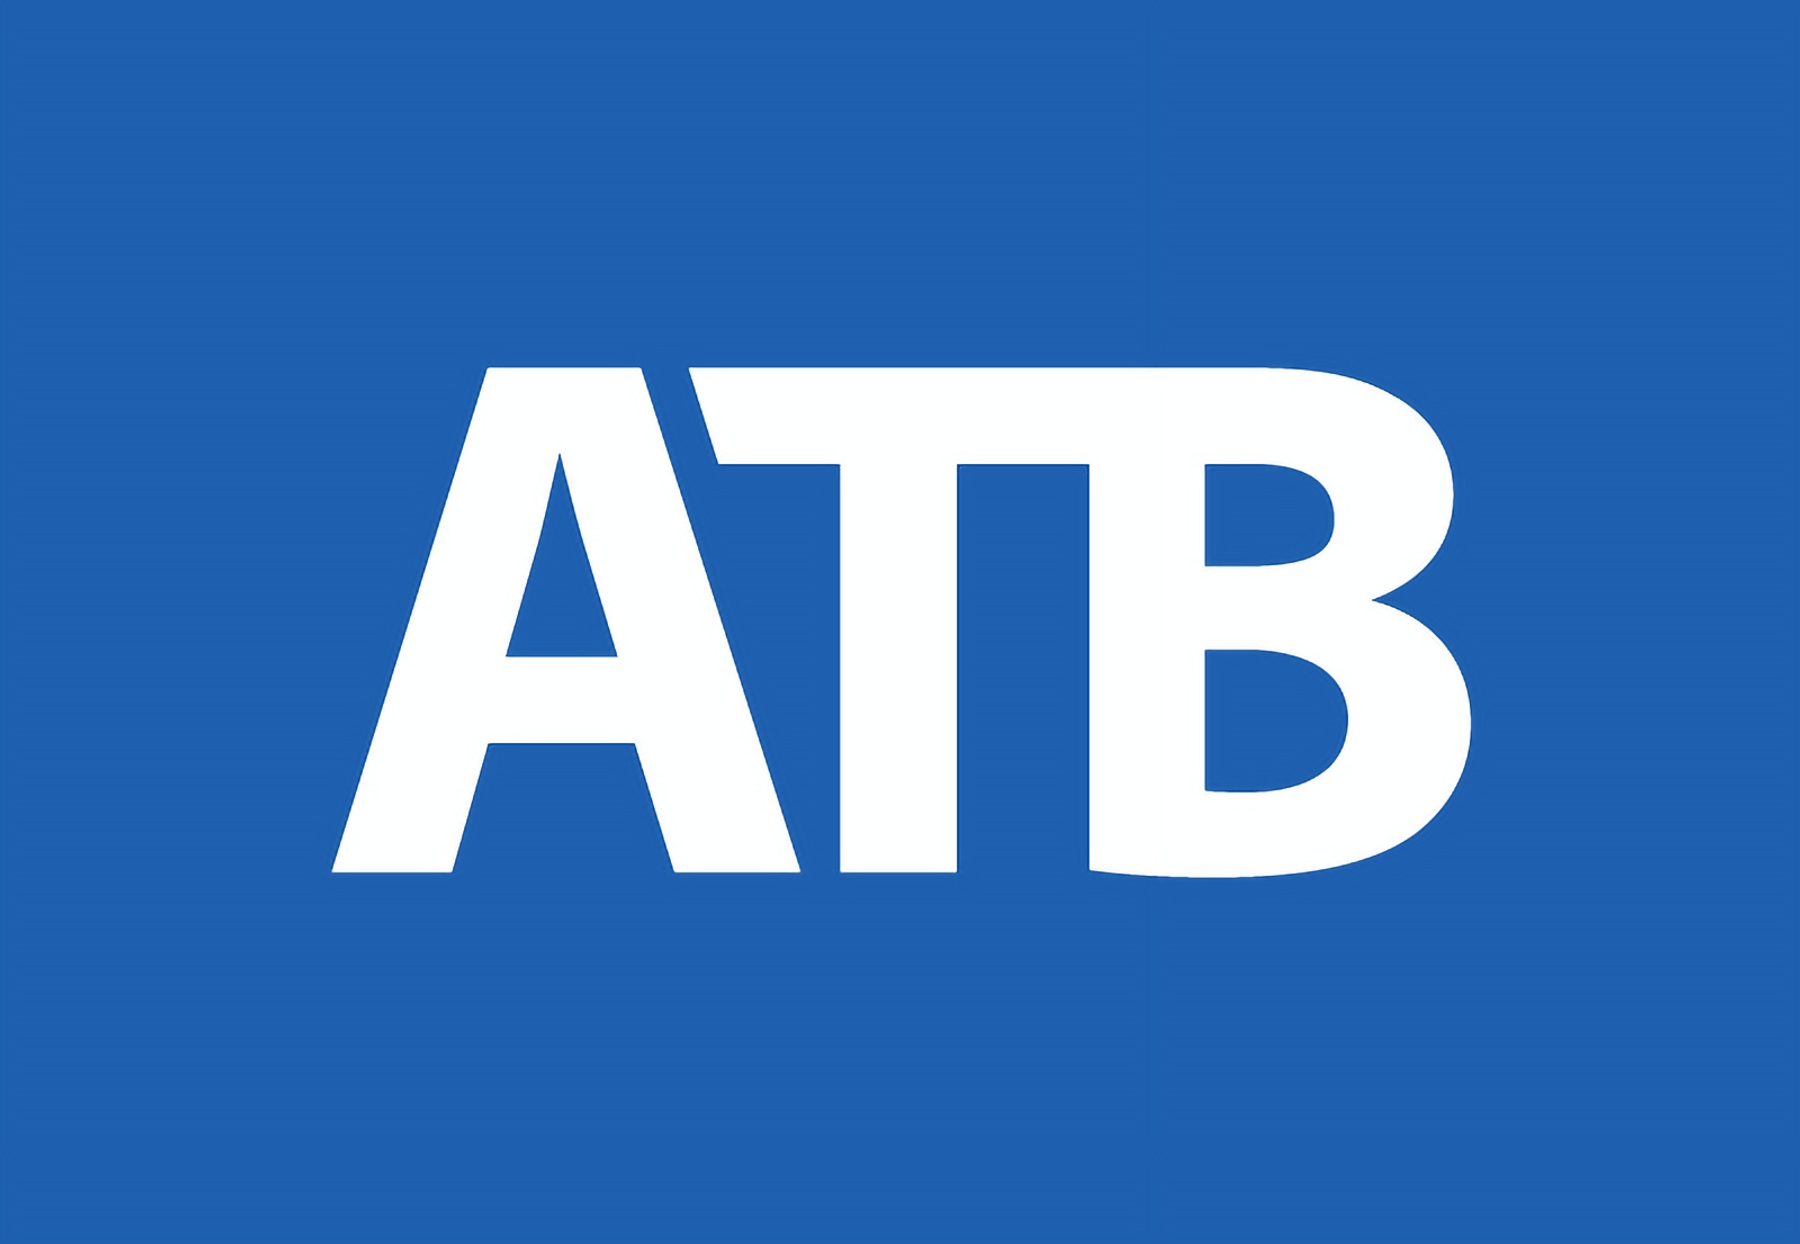 ATB Logo in blue and white